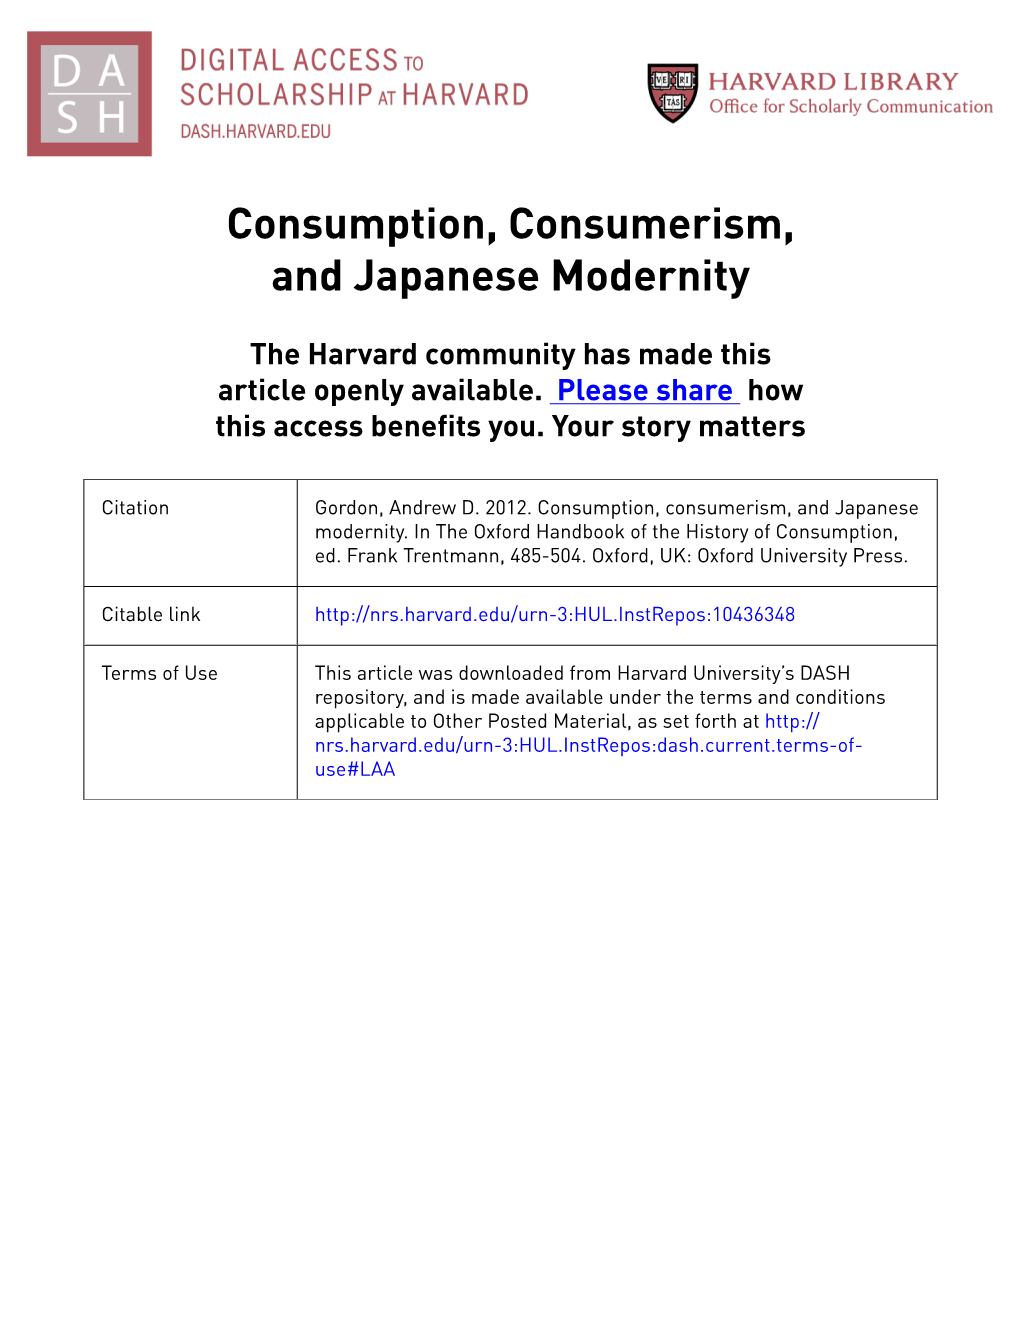 Consumption, Consumerism, and Japanese Modernity